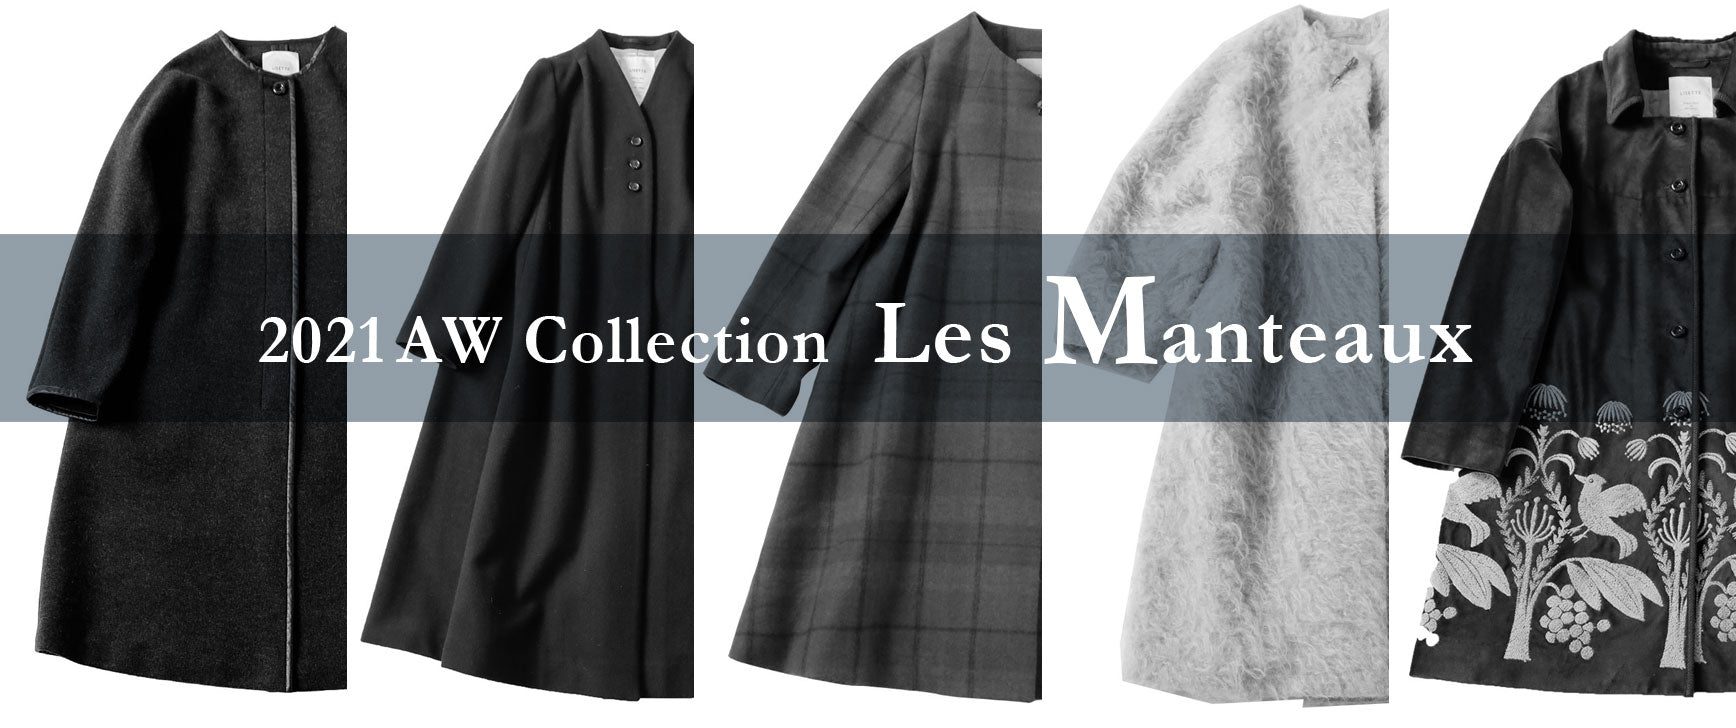 LISETTE-2021 AW Collection Les Manteaux – タグ 